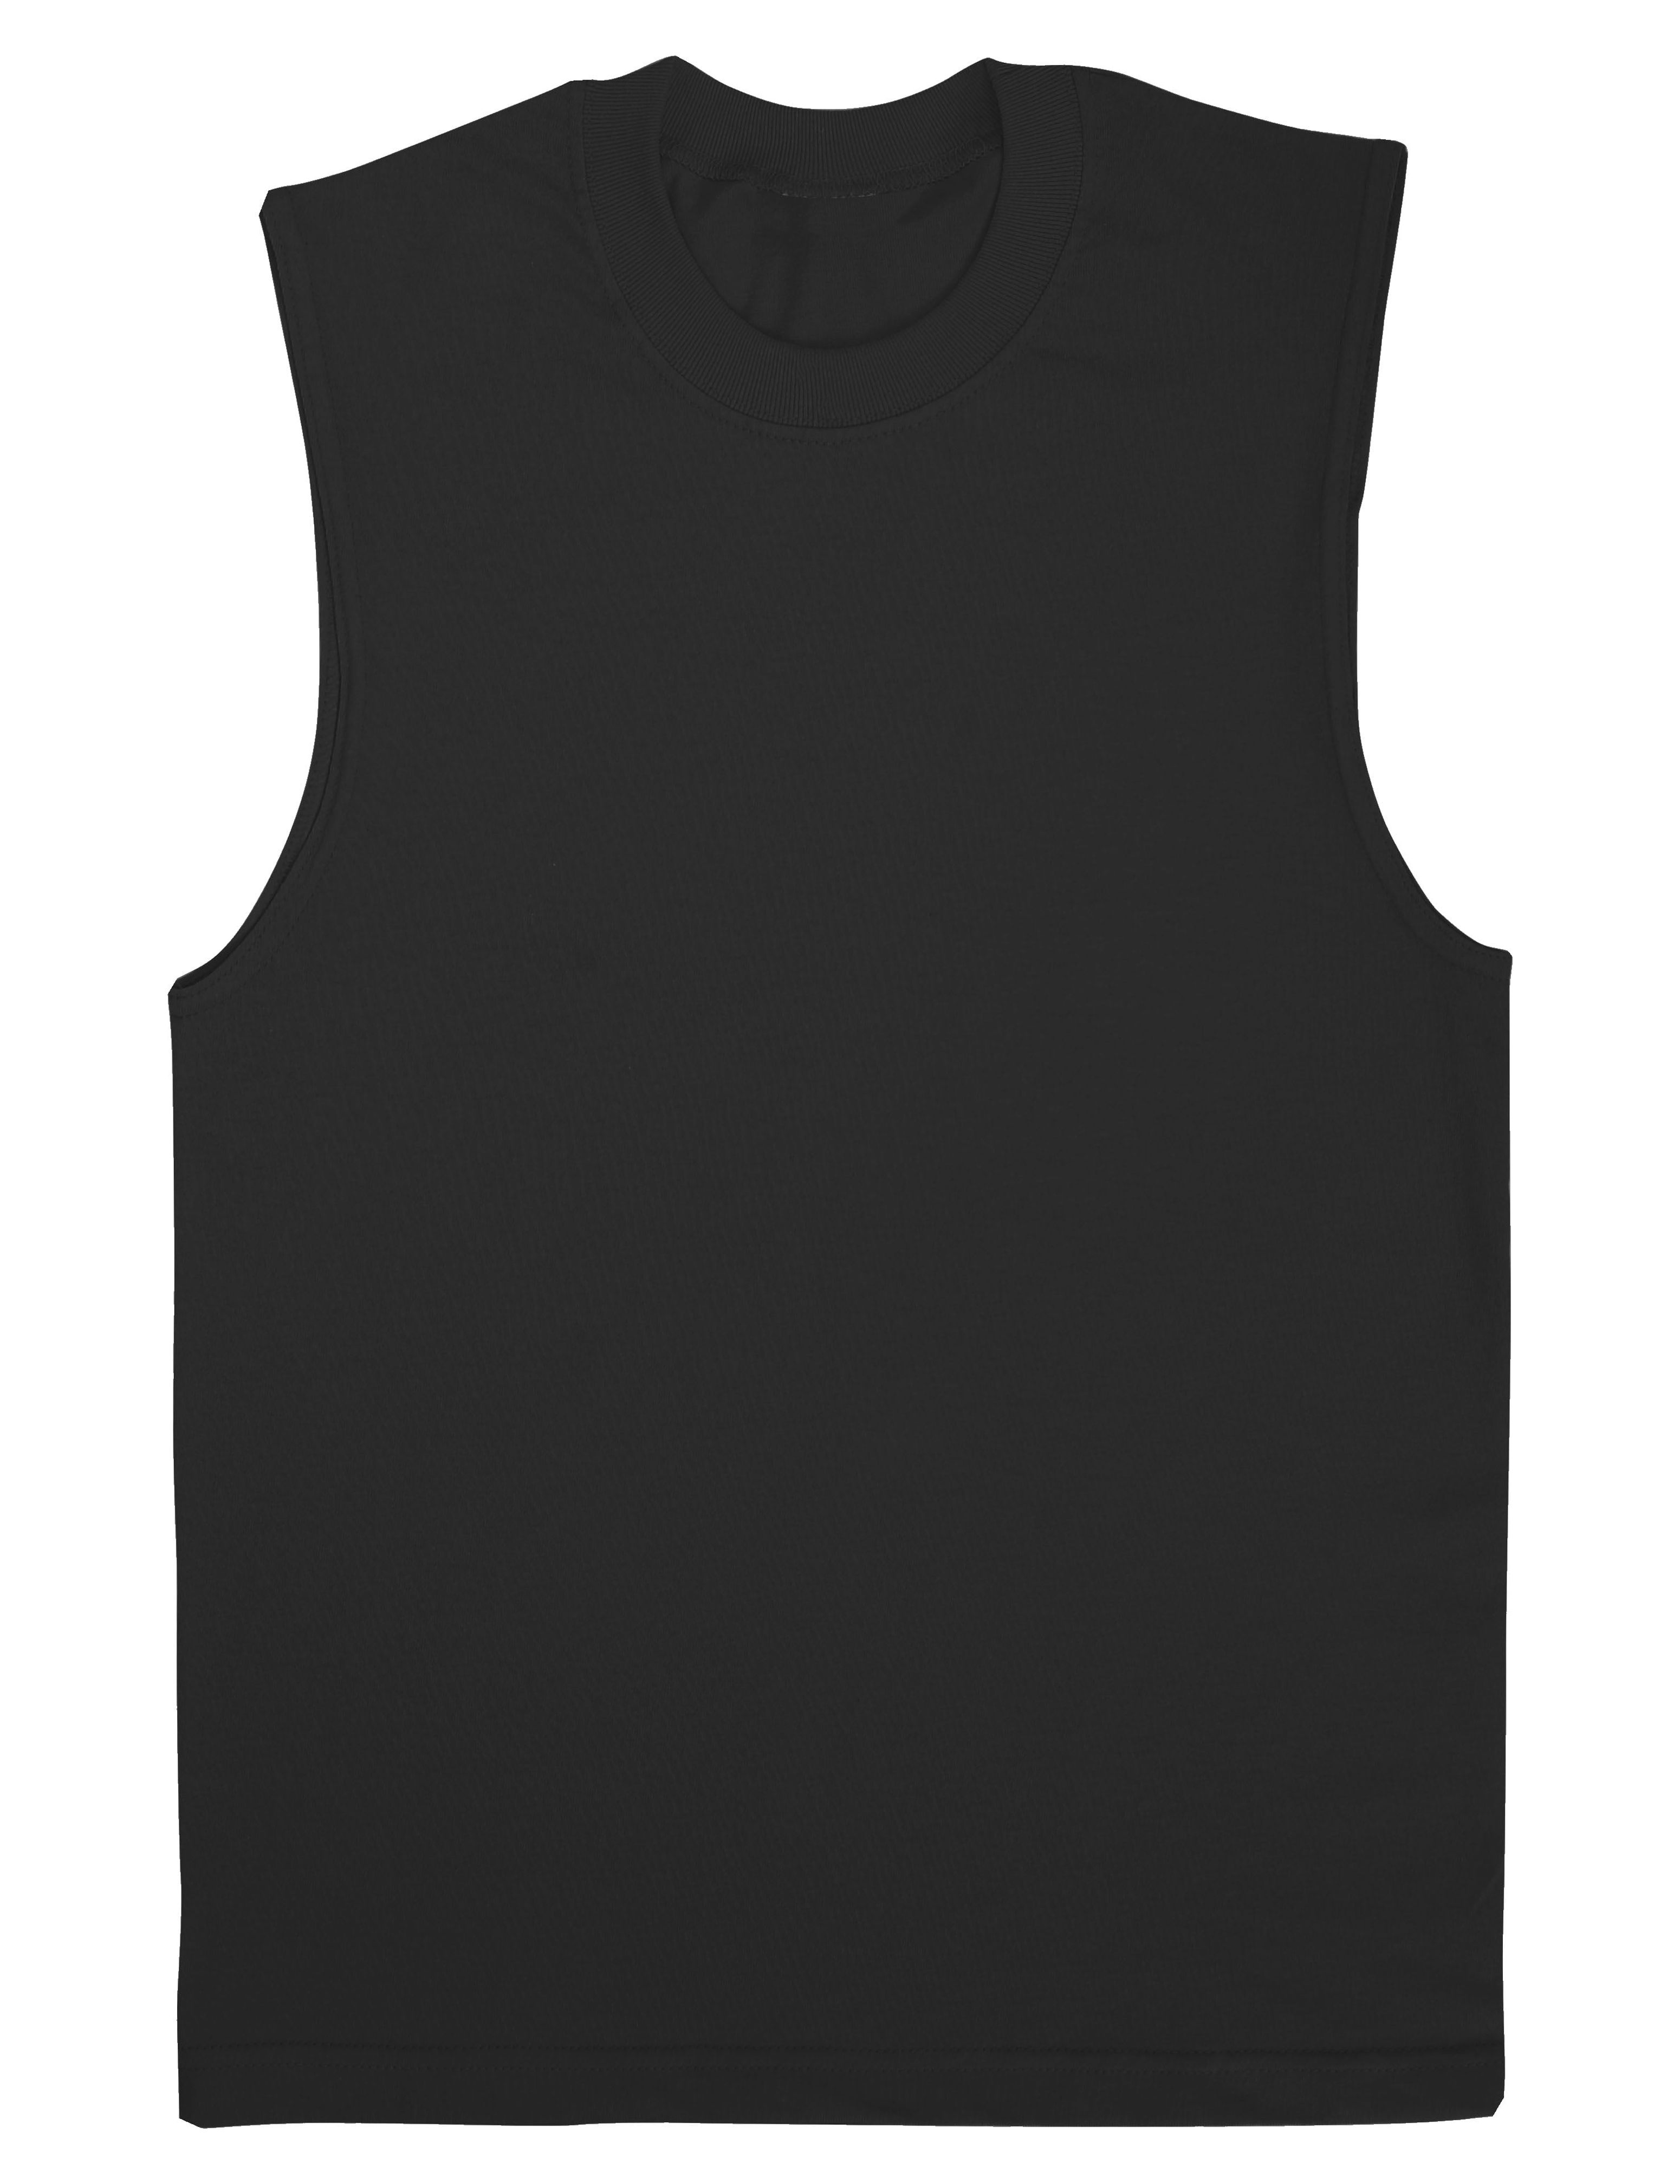 Hat and Beyond Men's Muscle Gym Tank Top Sleeveless T-Shirts - image 3 of 5